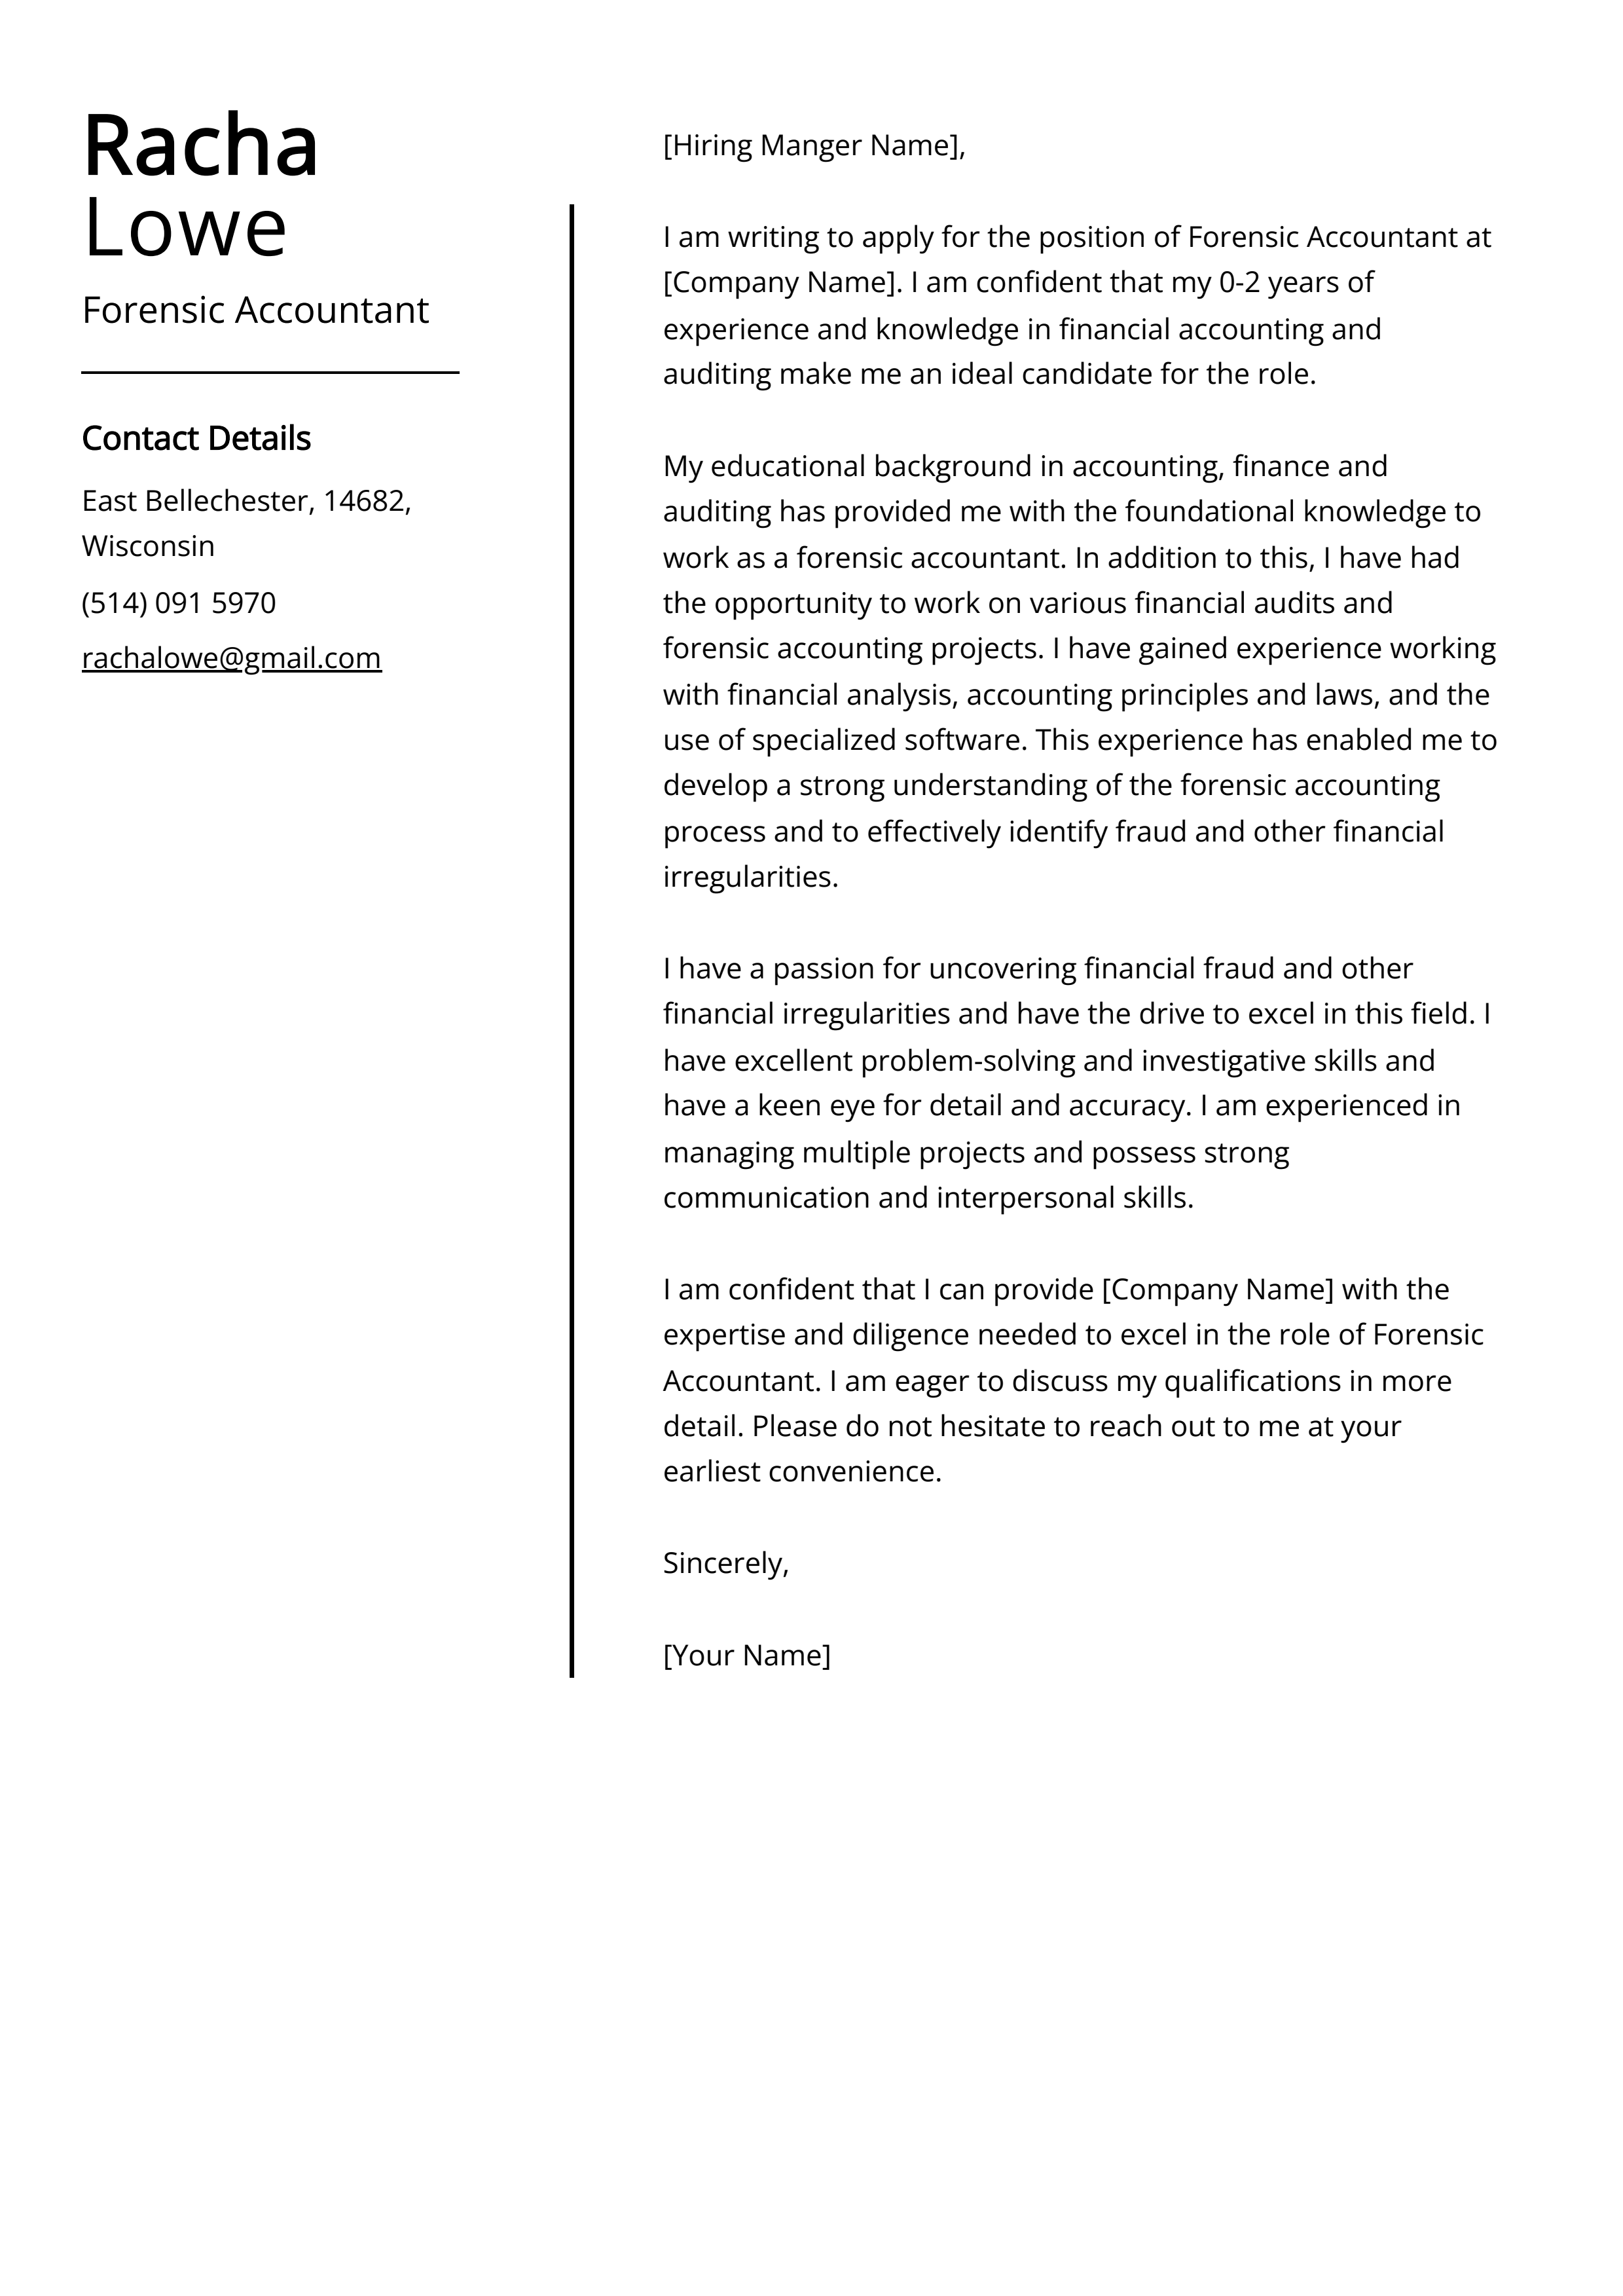 Forensic Accountant Cover Letter Example